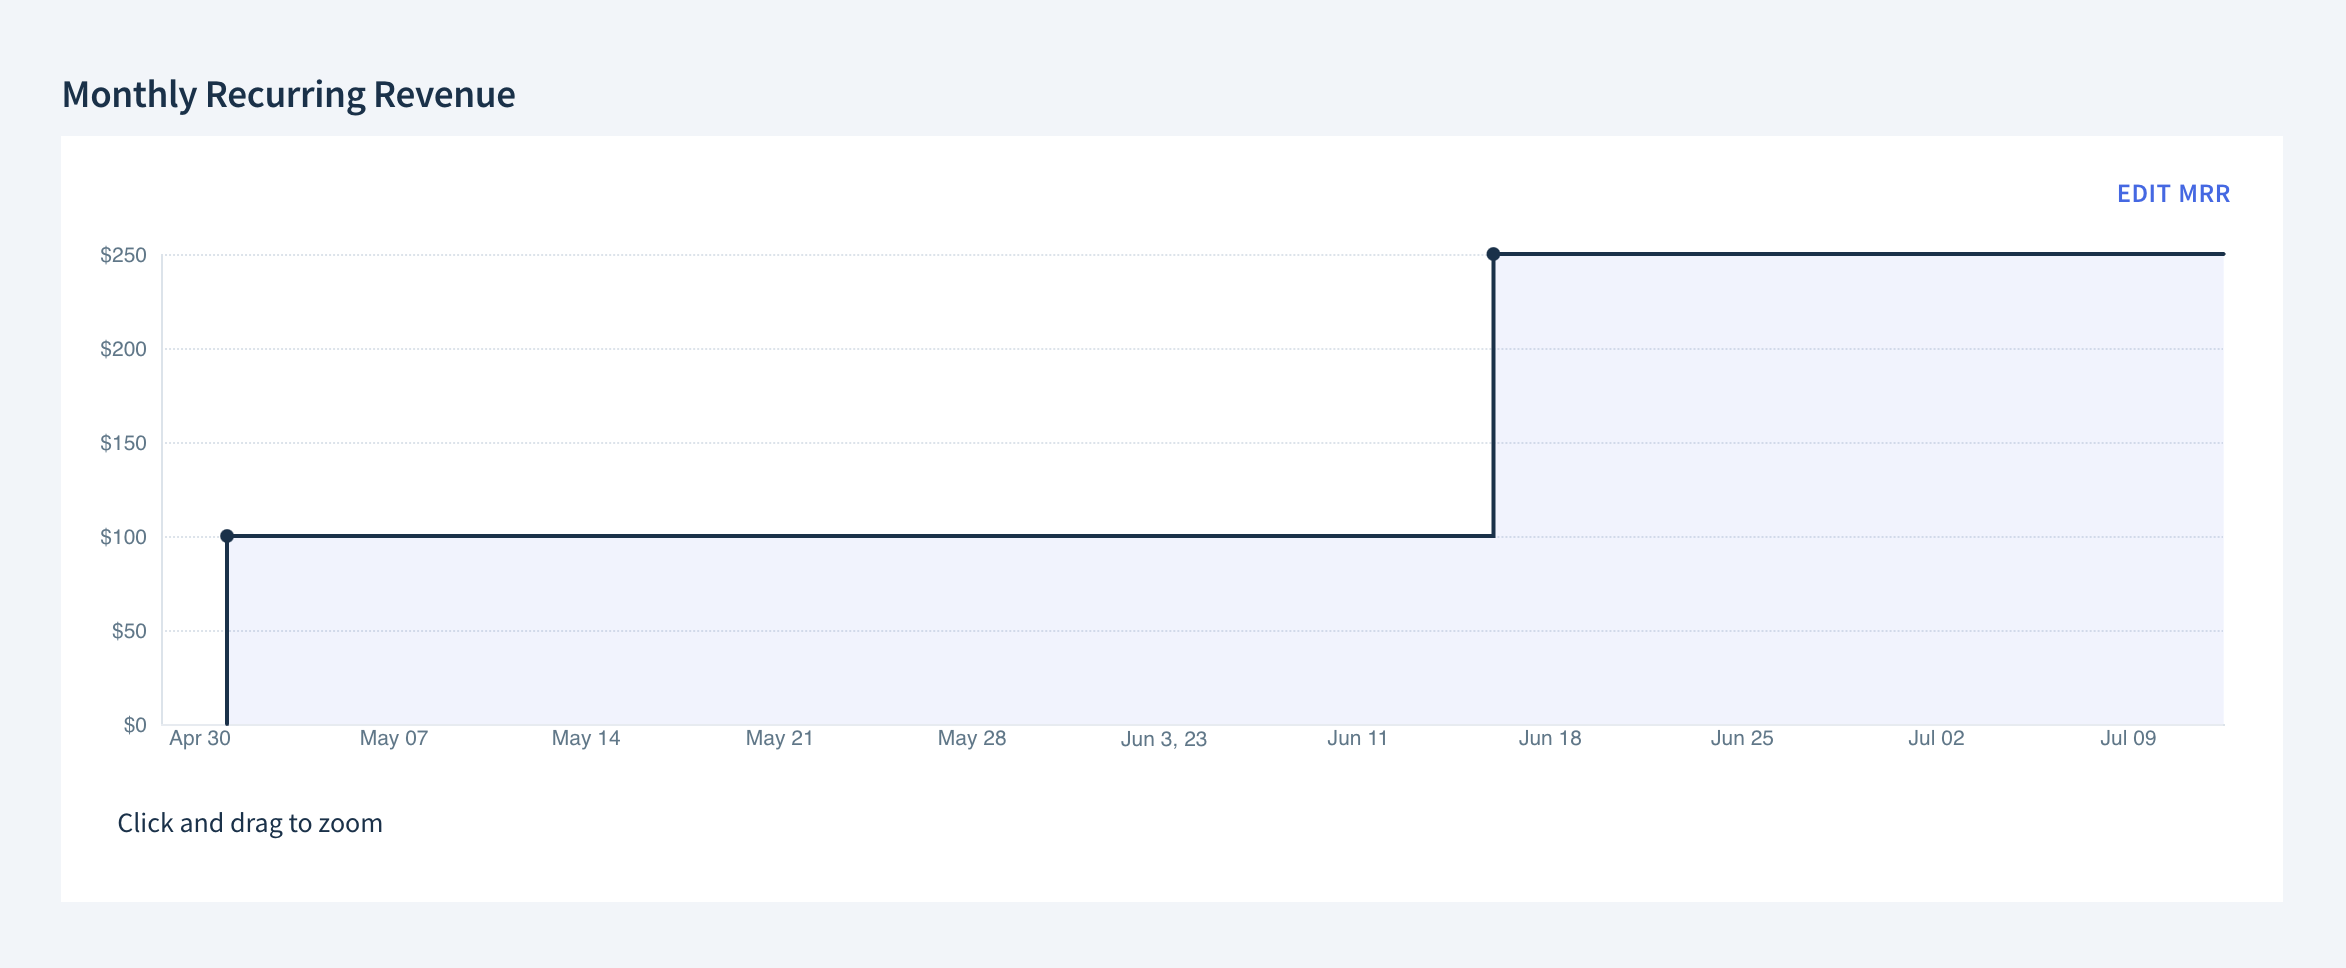 Screenshot of the Monthly Recurring Revenue chart. At the start of May 2023, MRR increases from 0 to 100 dollars. On June 16th, MRR increases to 250 dollars and remains at this level.